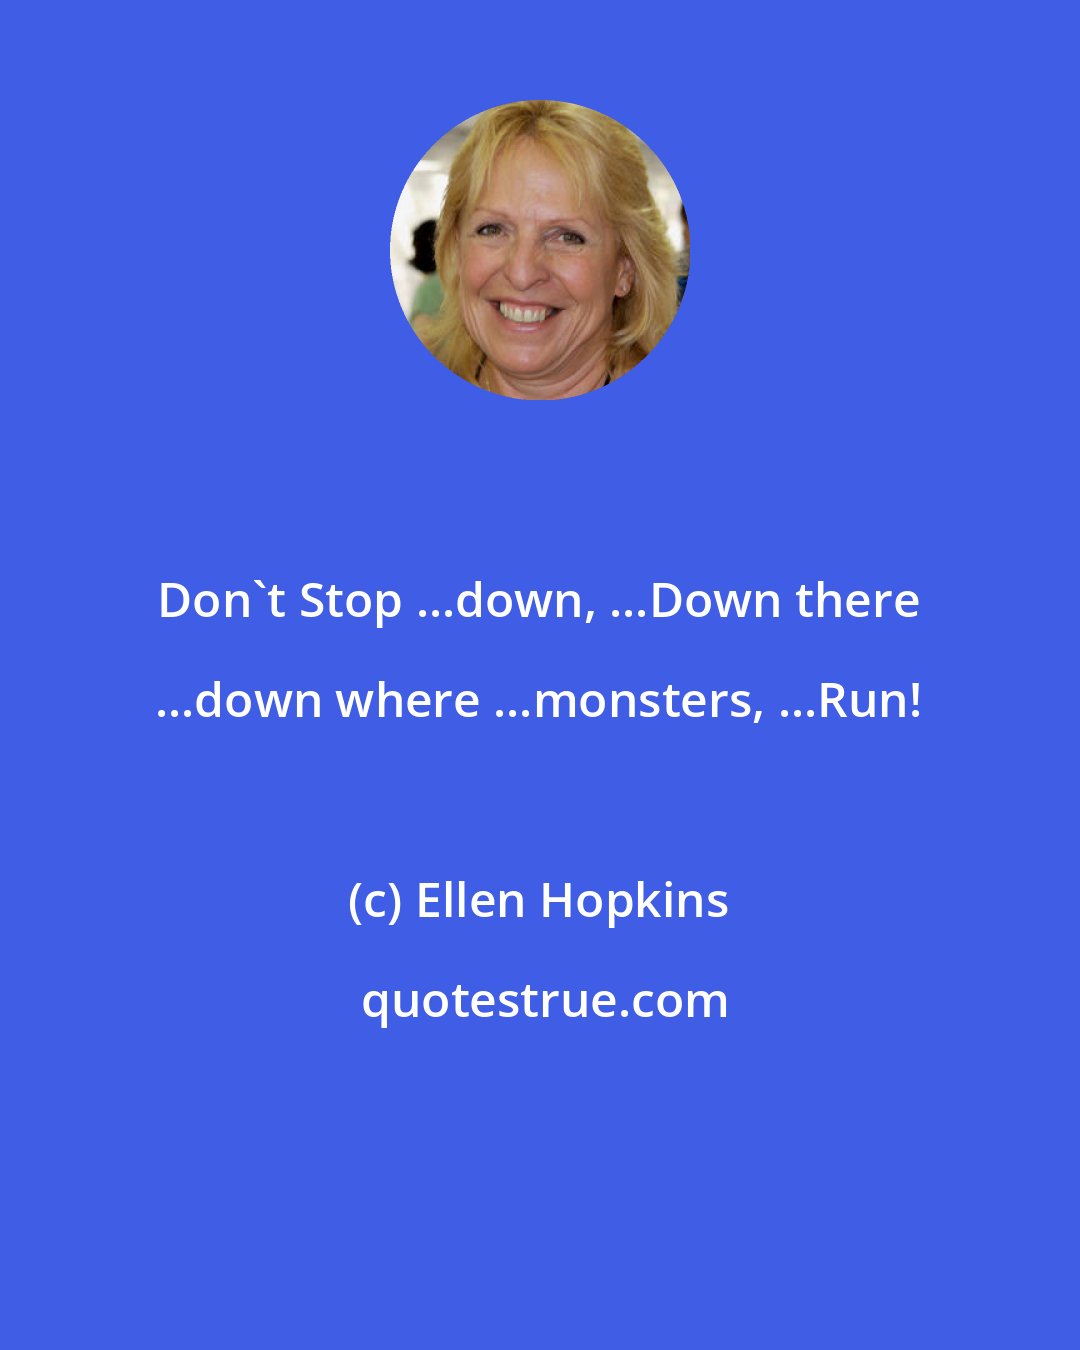 Ellen Hopkins: Don't Stop ...down, ...Down there ...down where ...monsters, ...Run!